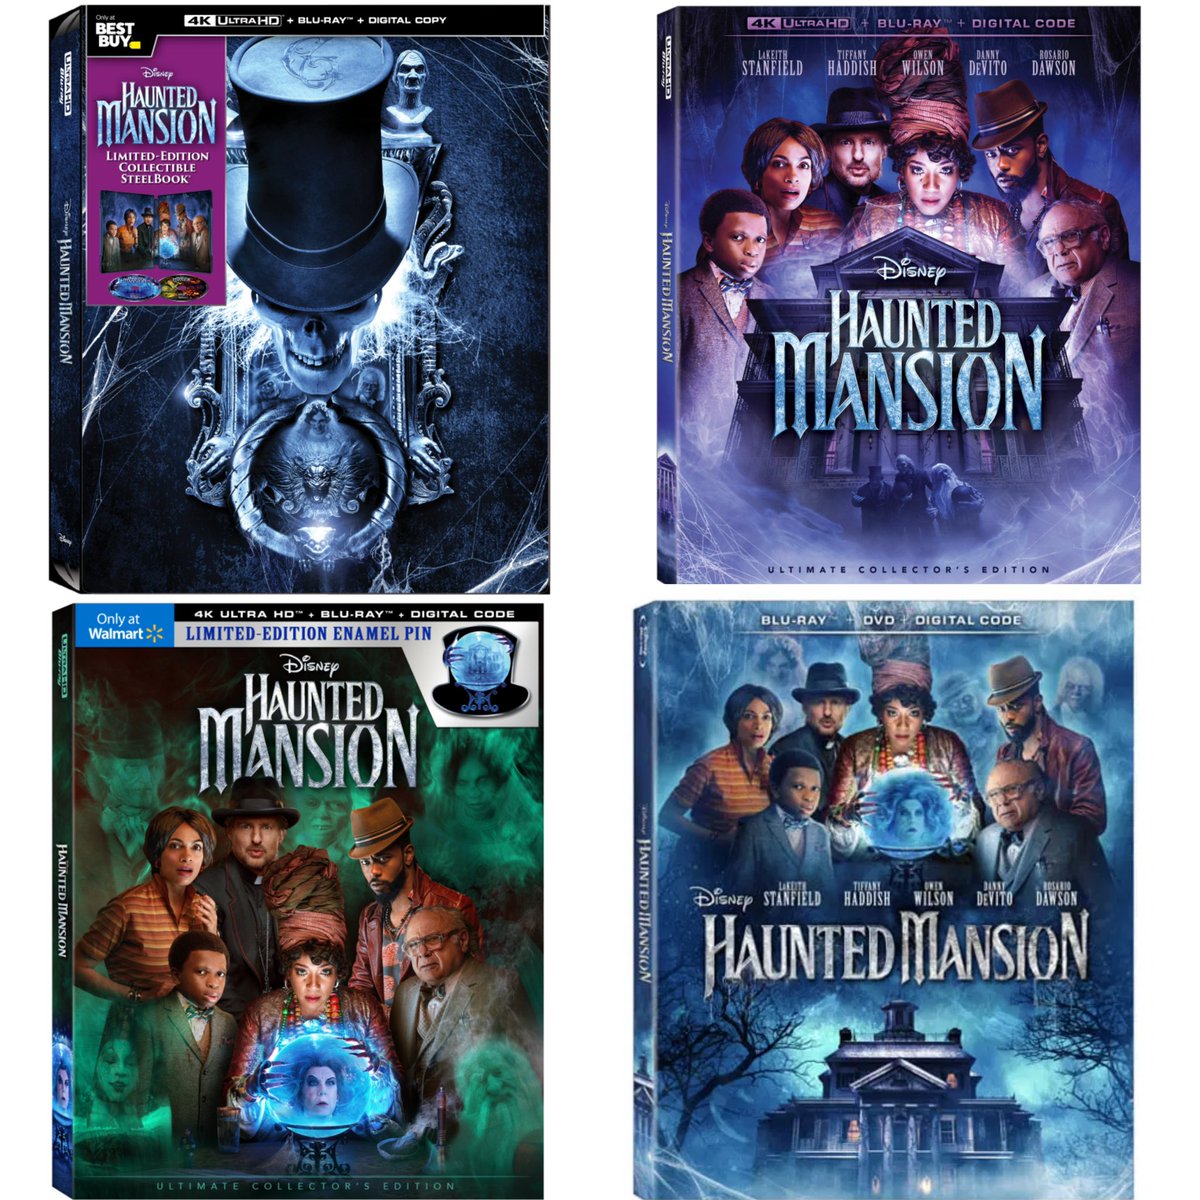 Coming to #4KUltraHD + #Bluray and #Steelbook via Disney on October 17, 2023 

Directed by #JustinSimien

Starring #LakeithStanfield, #RosarioDawson. #OwenWilson and #TiffanyHaddish 

Haunted Mansion (2023)